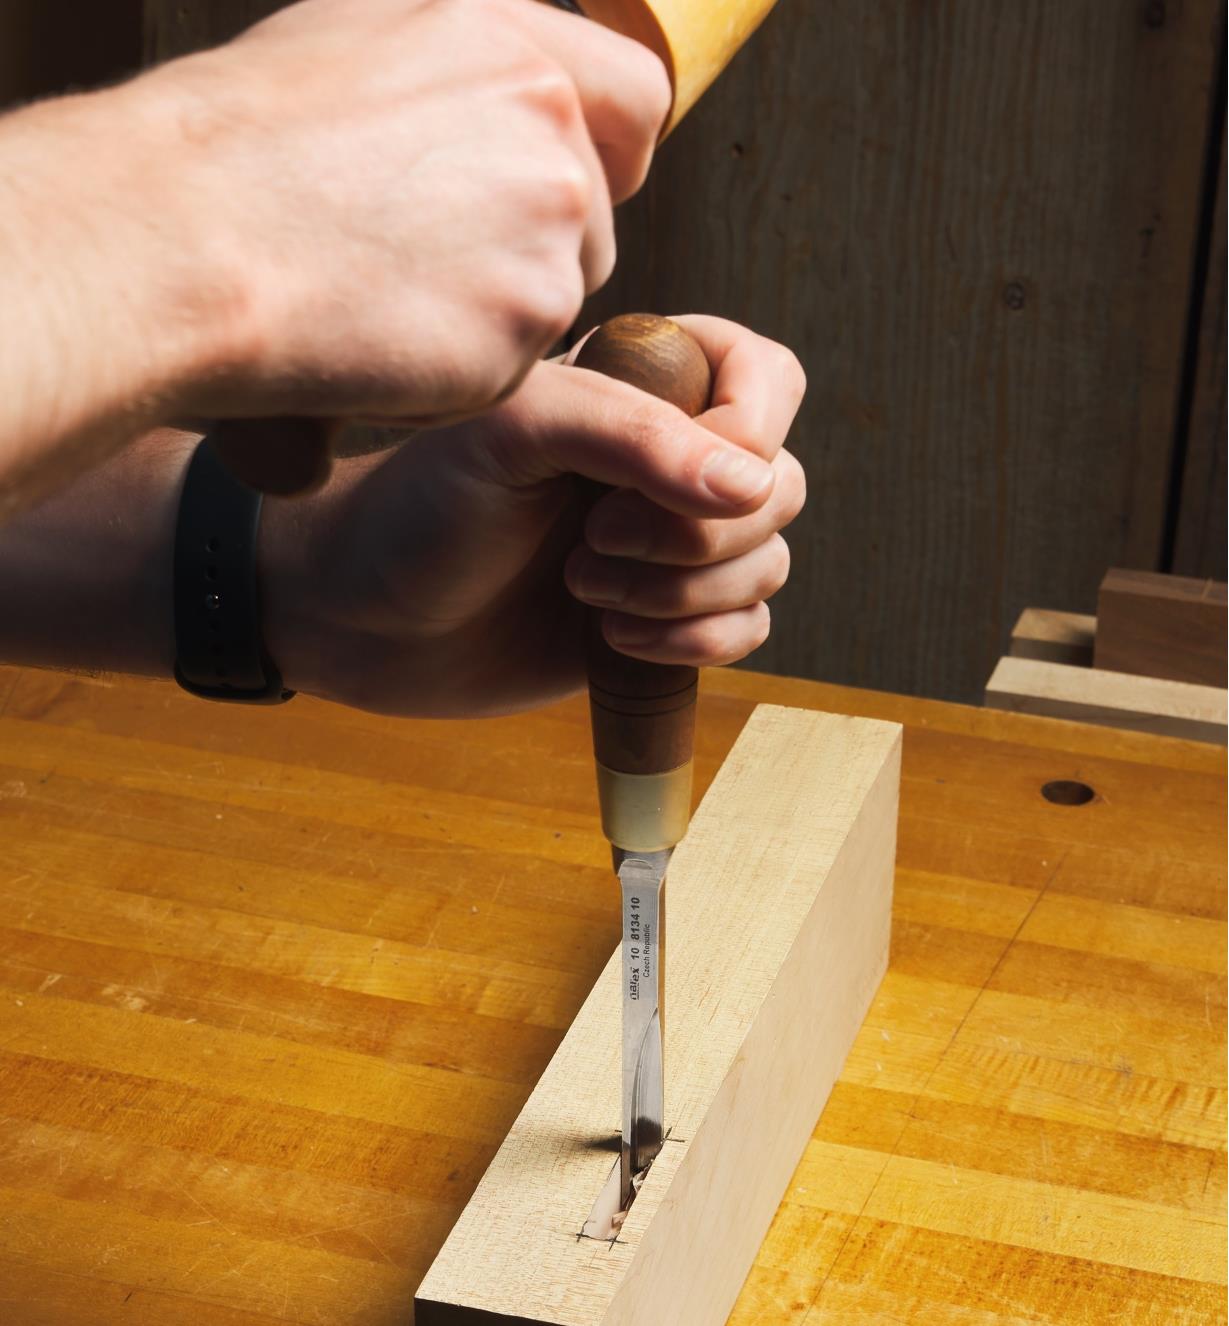 A corner chisel being used to square the corner of a mortise